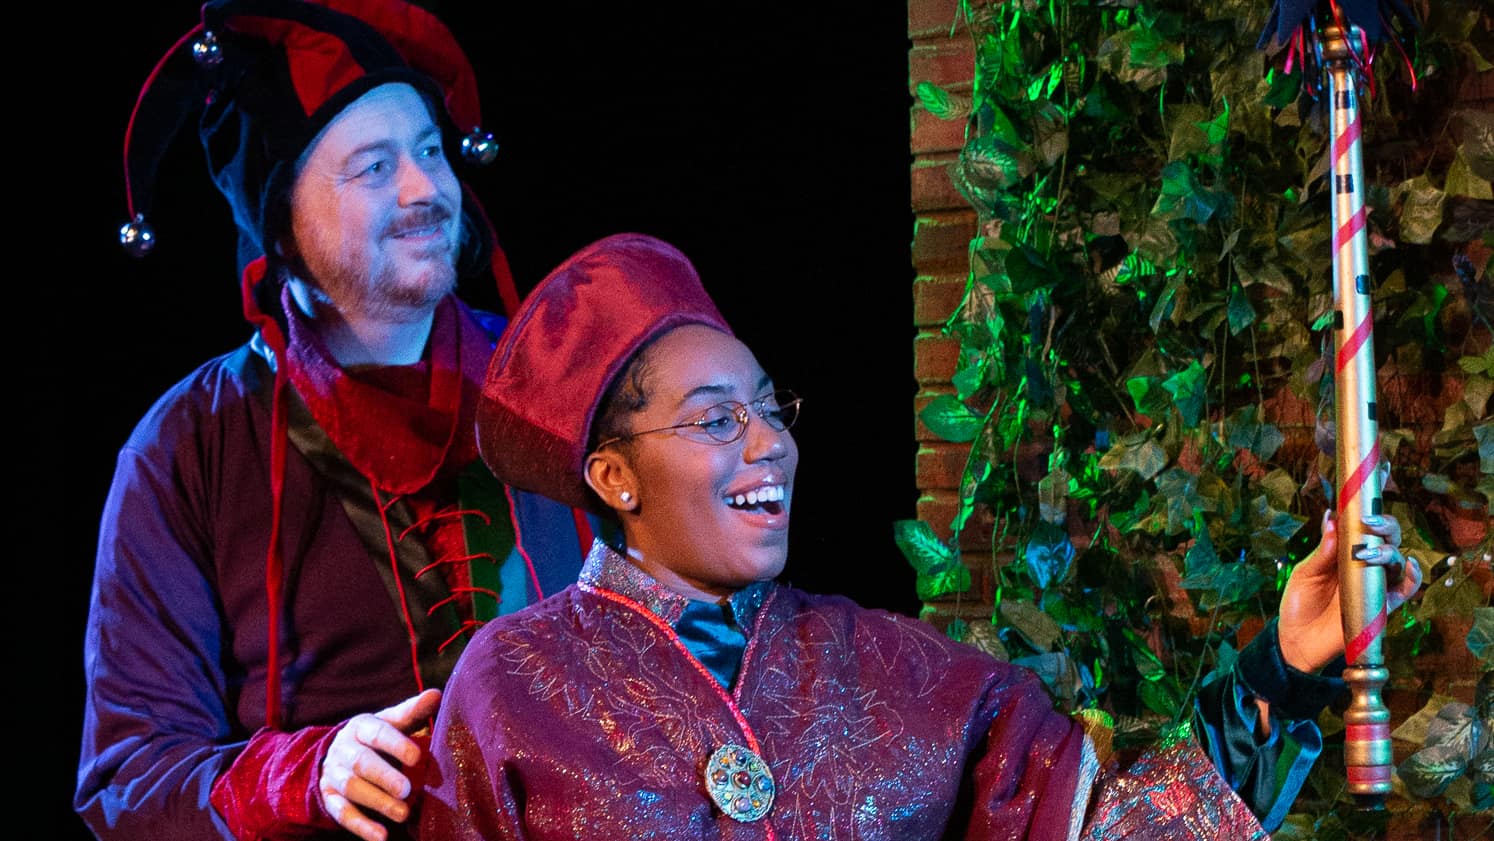 Matt Neely and Camille Upshaw look for adventure in Shakespearean garb in Barrington Stage's 10x10 Festival of New Plays. Press photo courtesy of the theater.